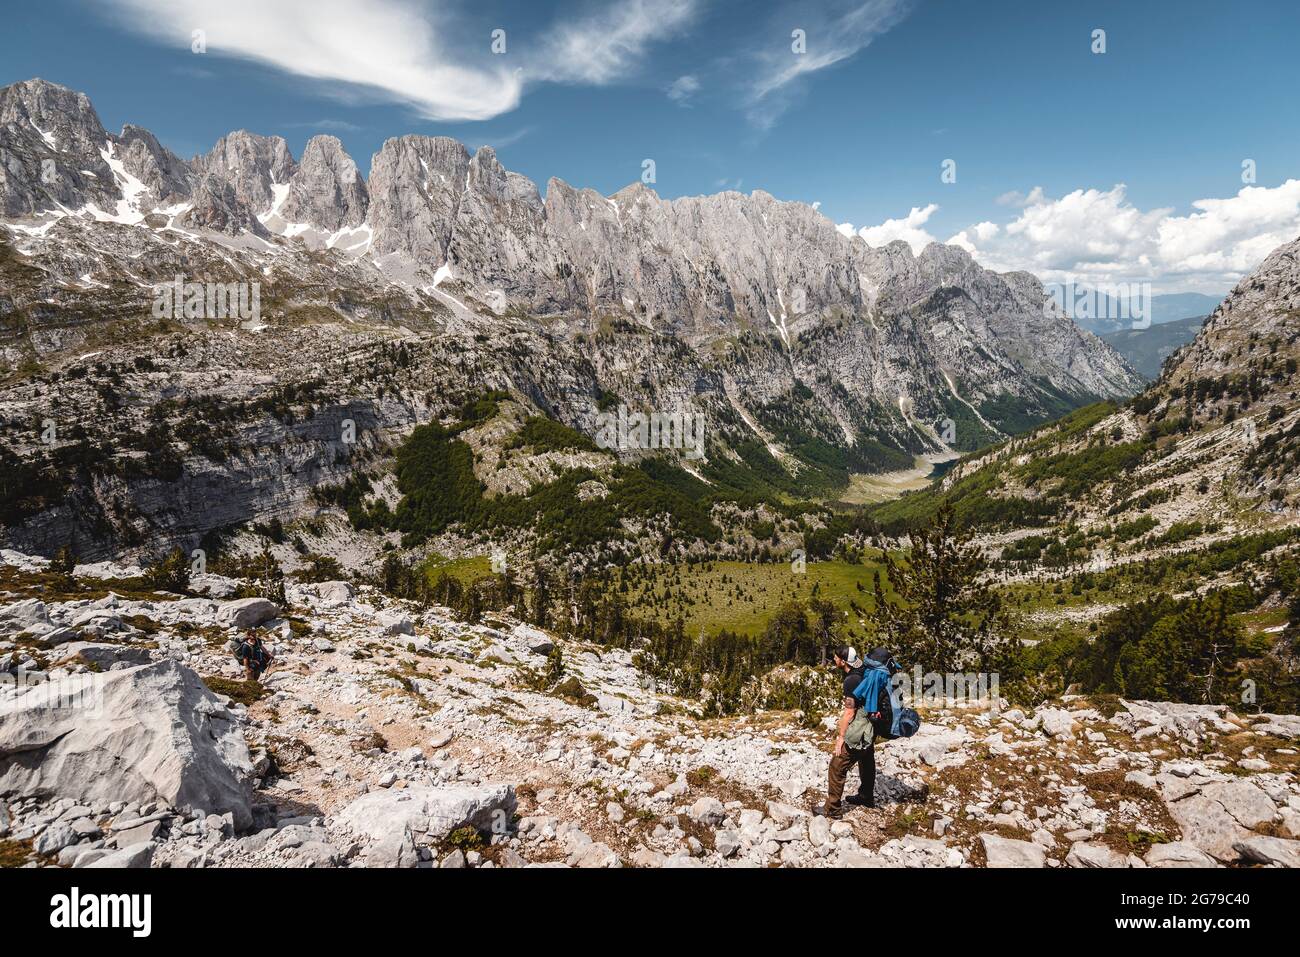 In bright sunshine, a single hiker looks out over the landscape of the Prokletije National Park to a huge mountain range, Albania Stock Photo